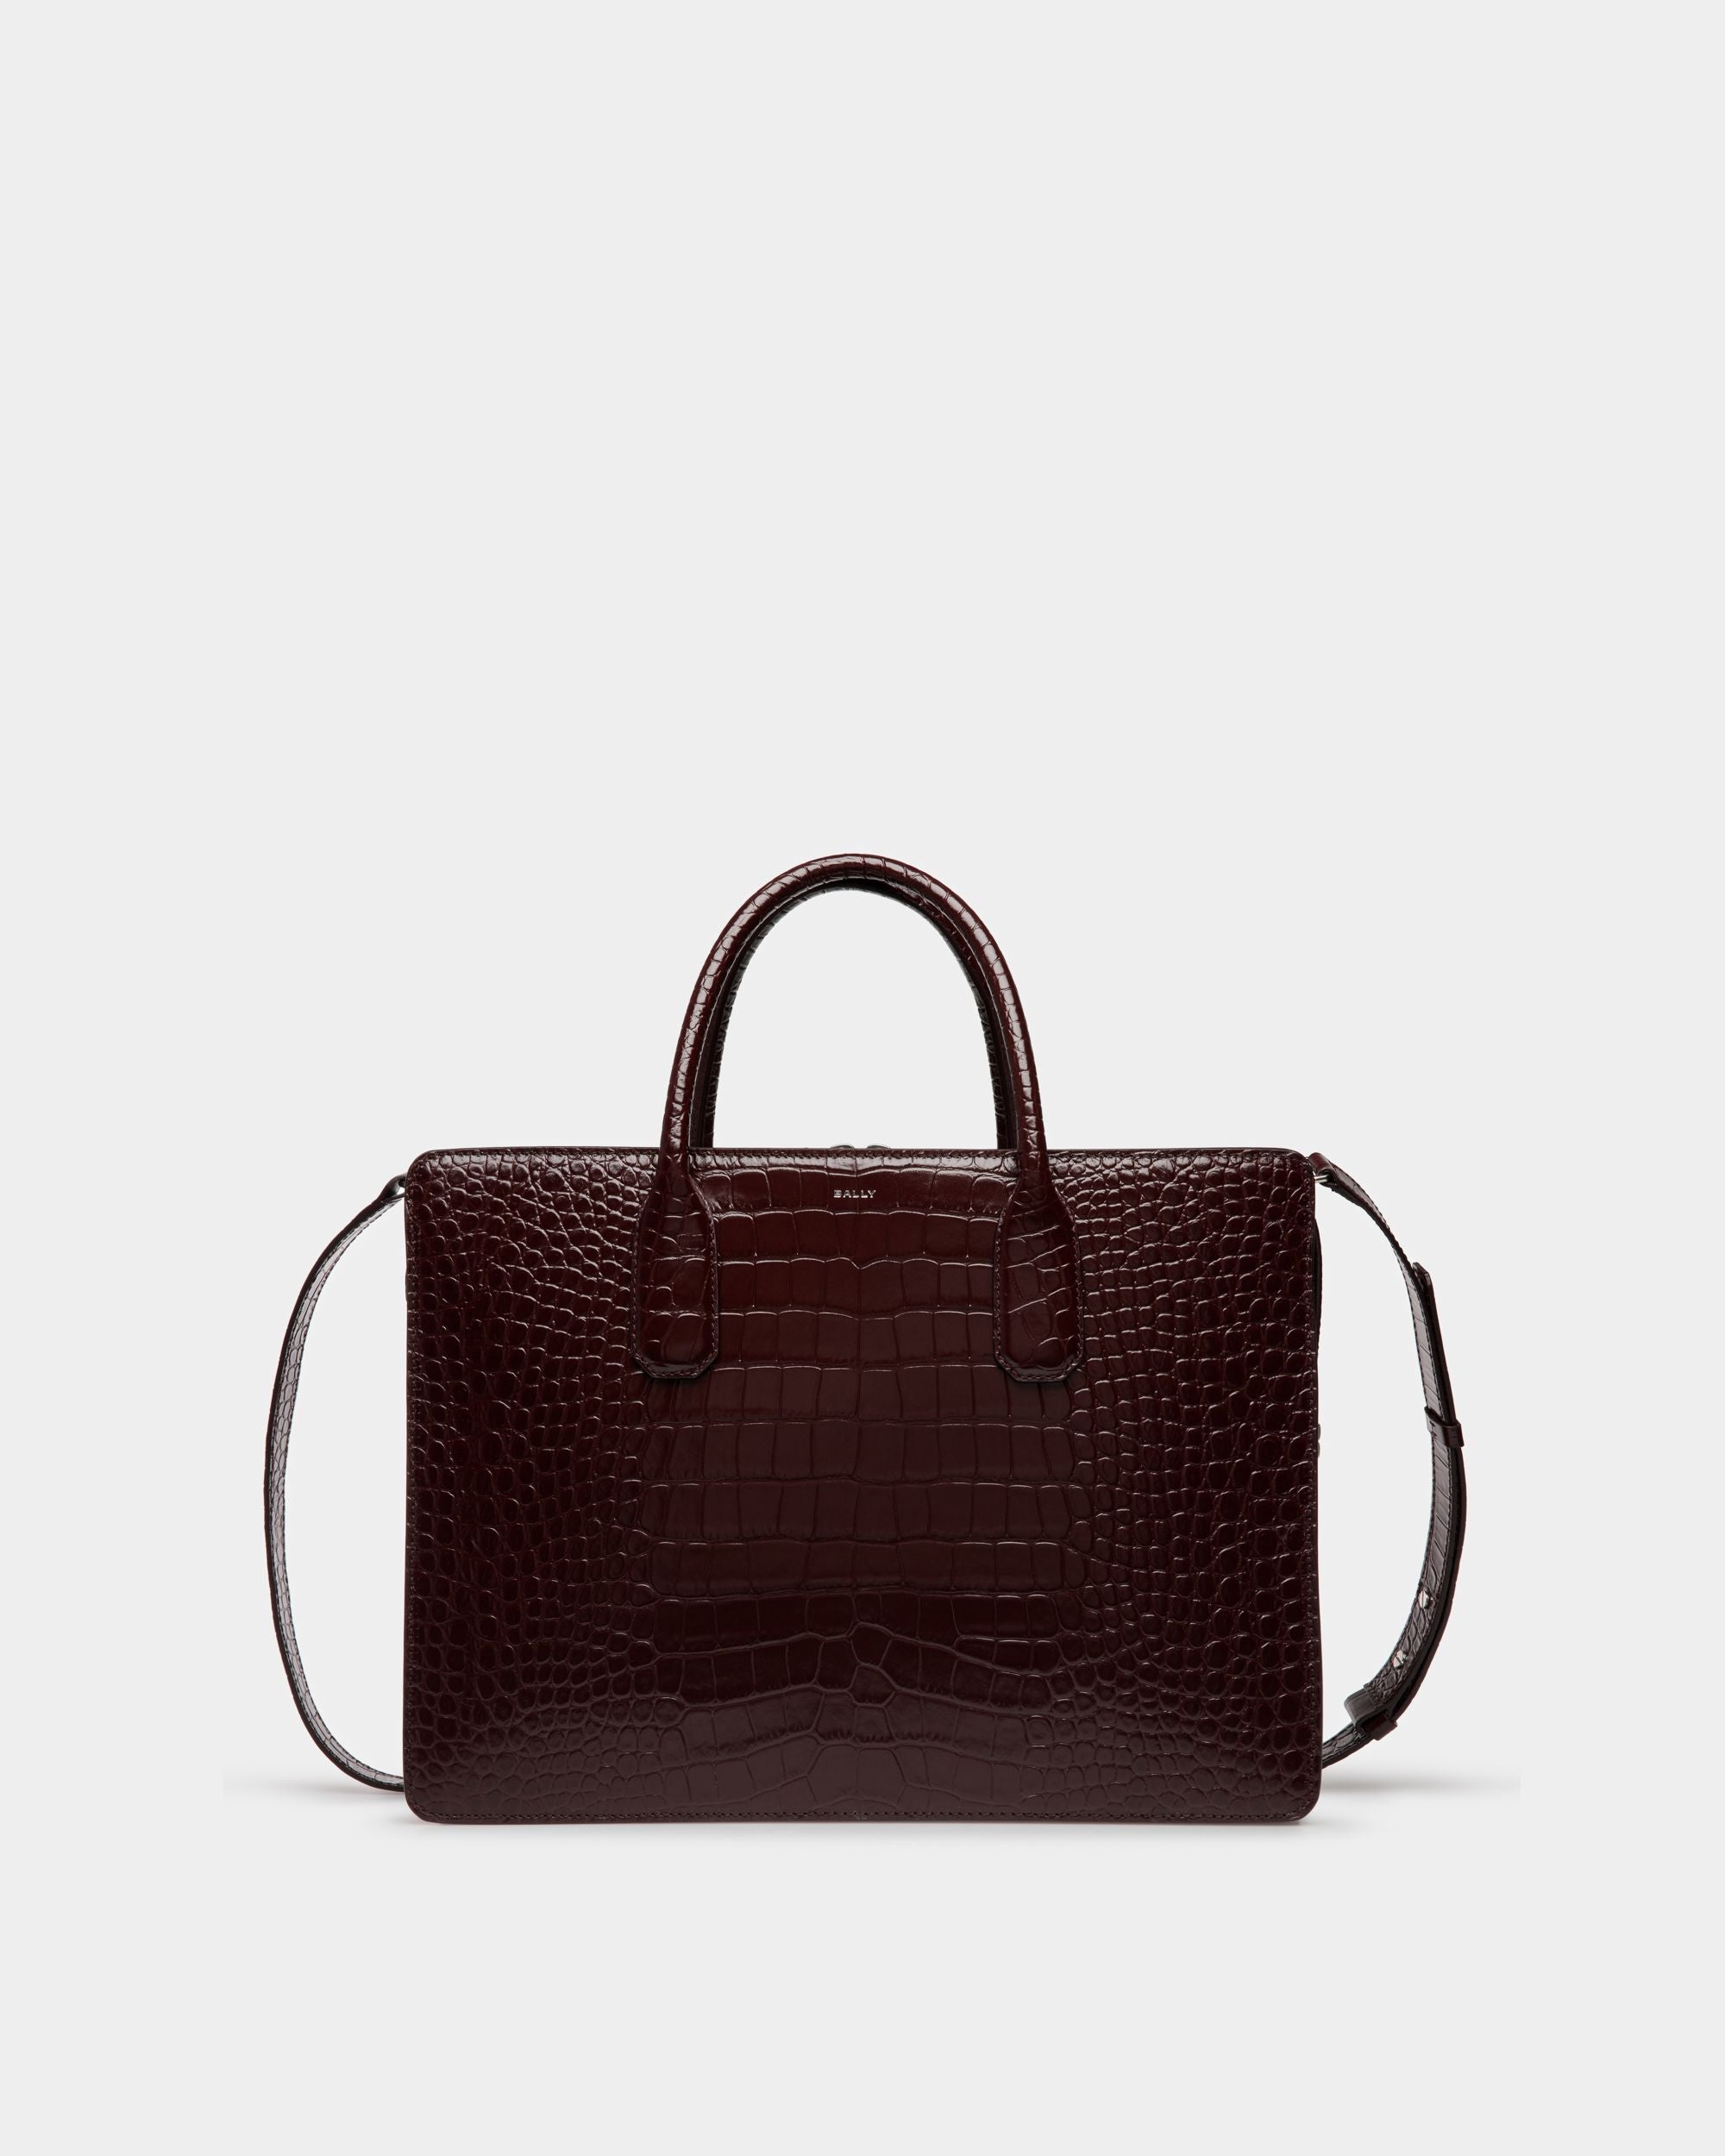 Busy | Men's Business Bag | Chablis Leather | Bally | Still Life Front